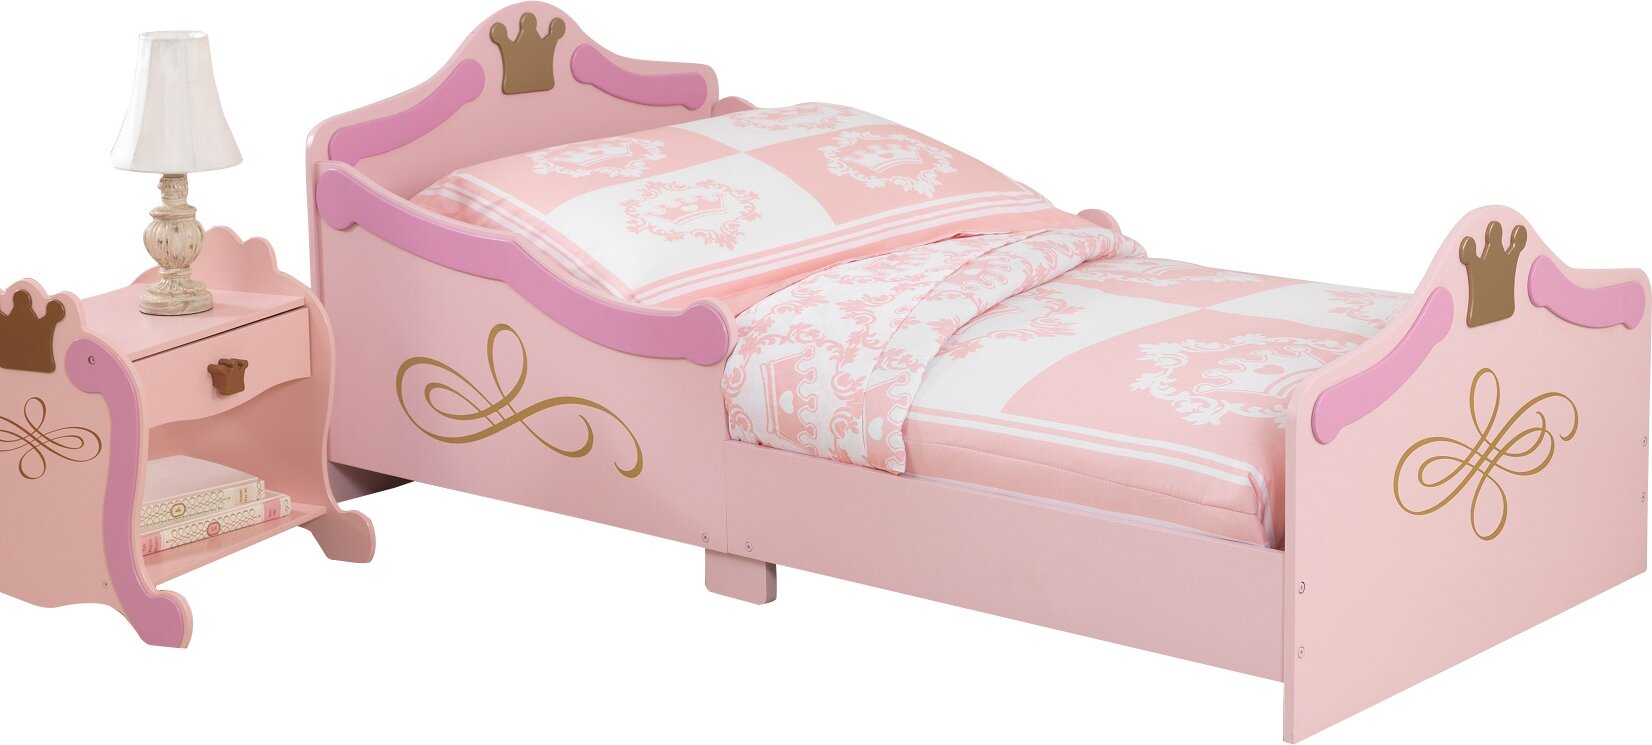 ashley convertible toddler bed with mattress